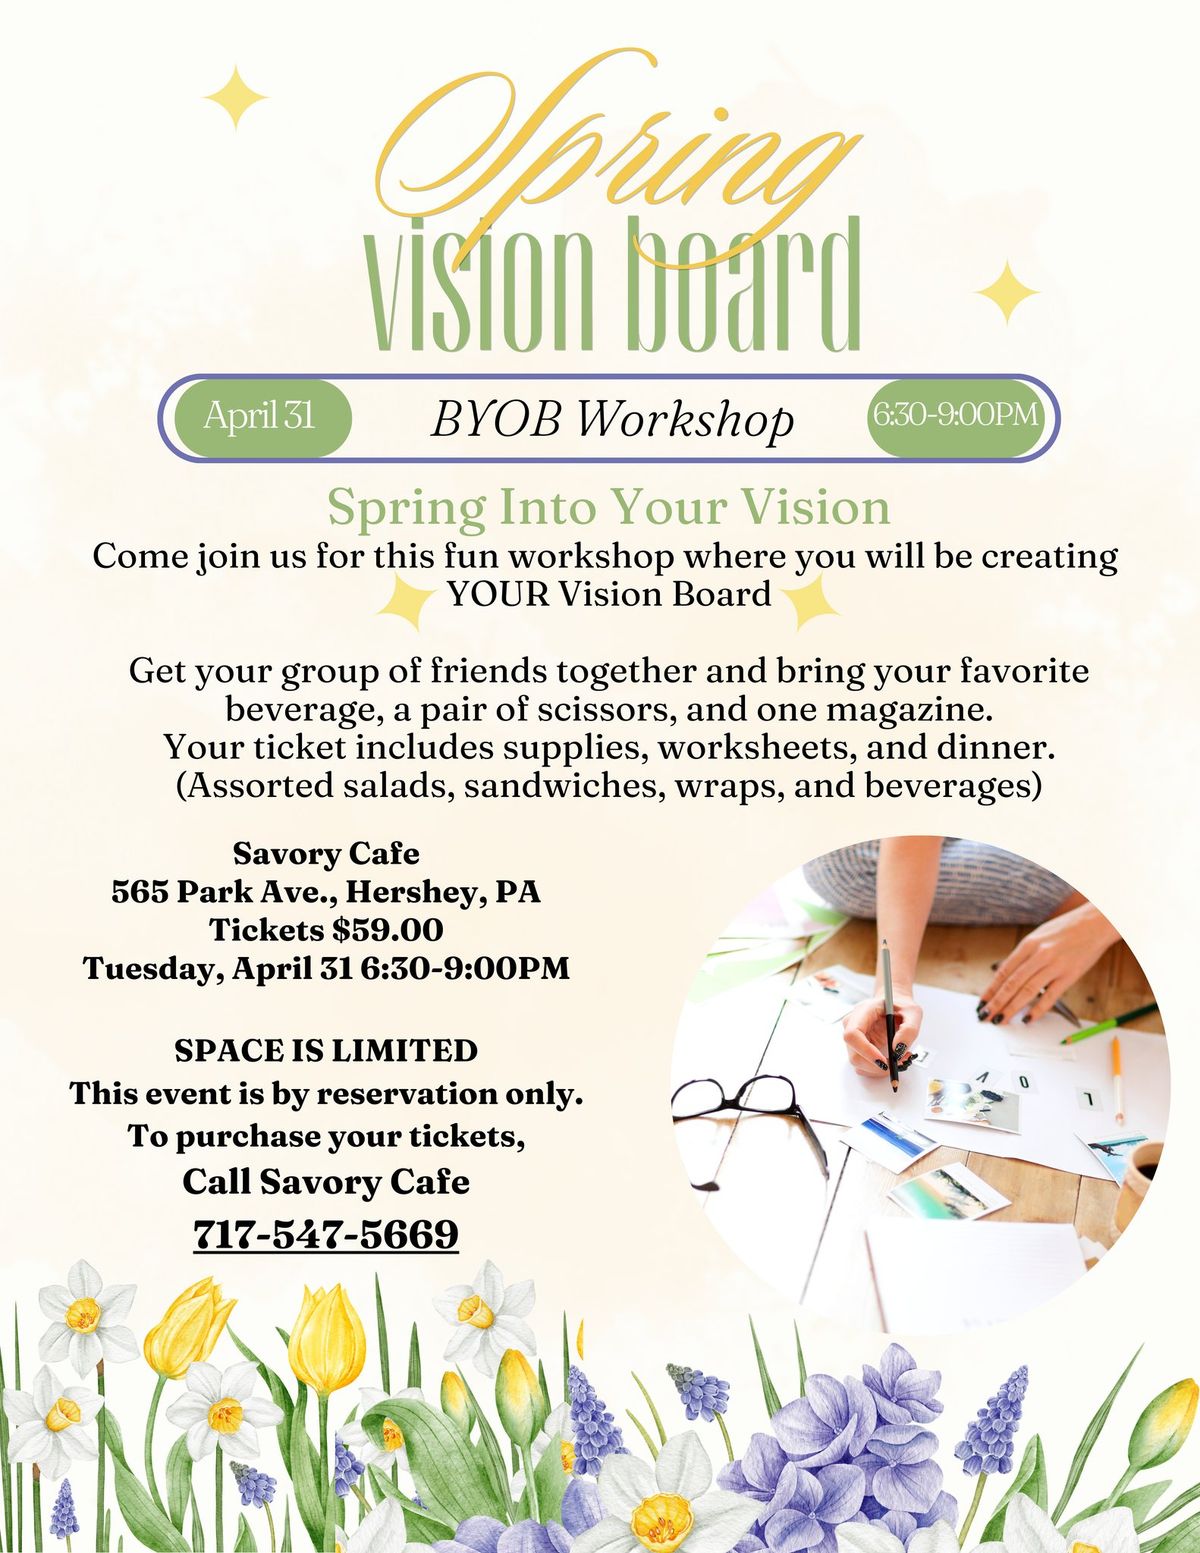 Vision Board, dinner and friends night out!